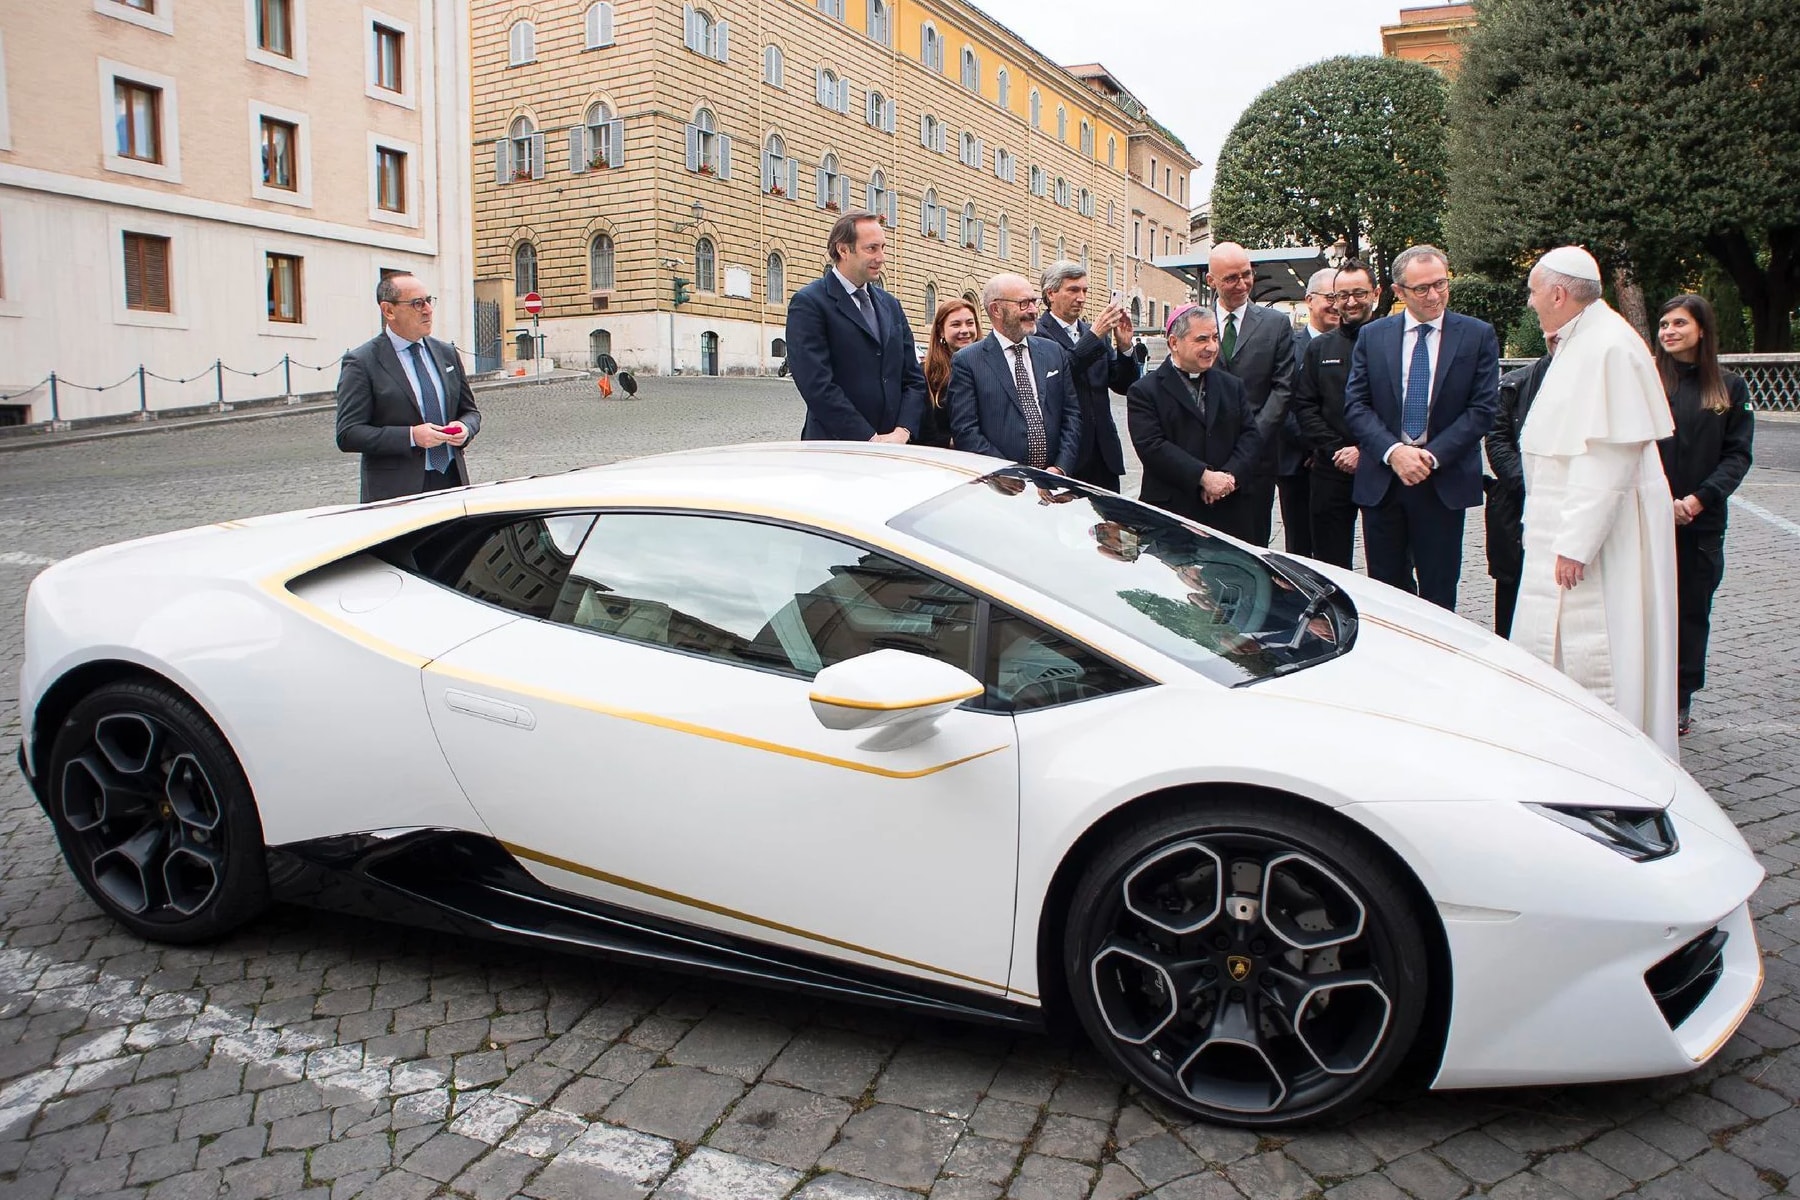 Pope Francis Lamborghini Huracan Auction price purchase 2018 sports car charity